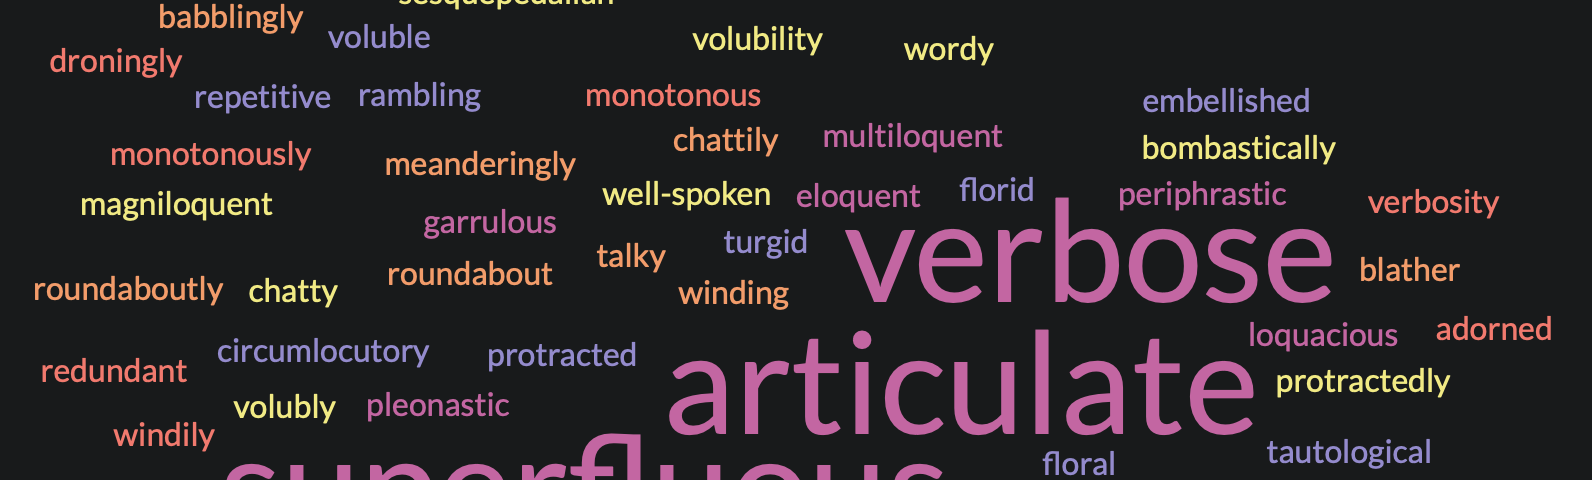 Word cloud containing the wide array of synonyms for the word “wordy” created by author